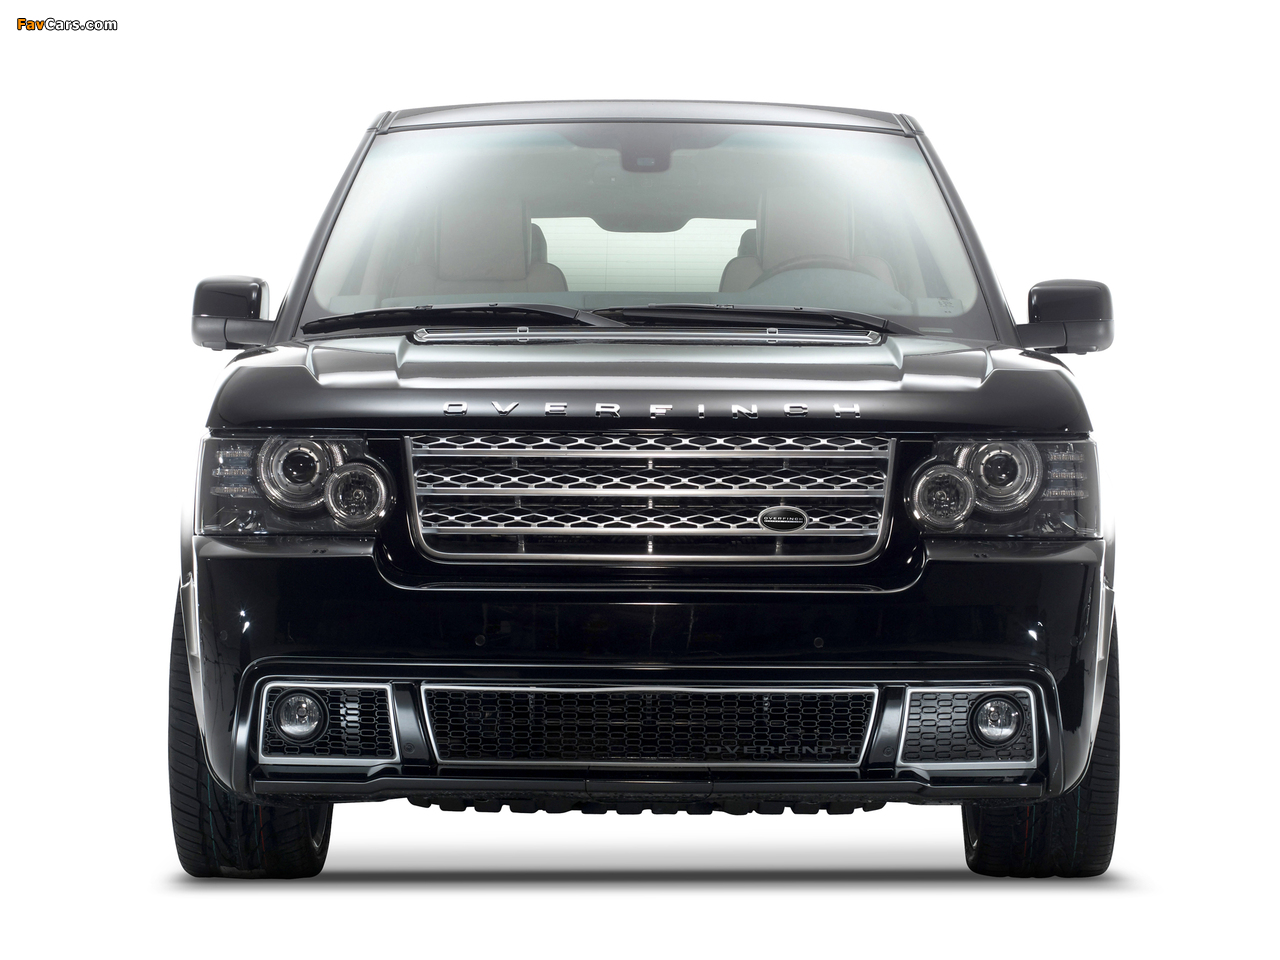 Overfinch Range Rover Supercharged Royale (L322) 2009 pictures (1280 x 960)